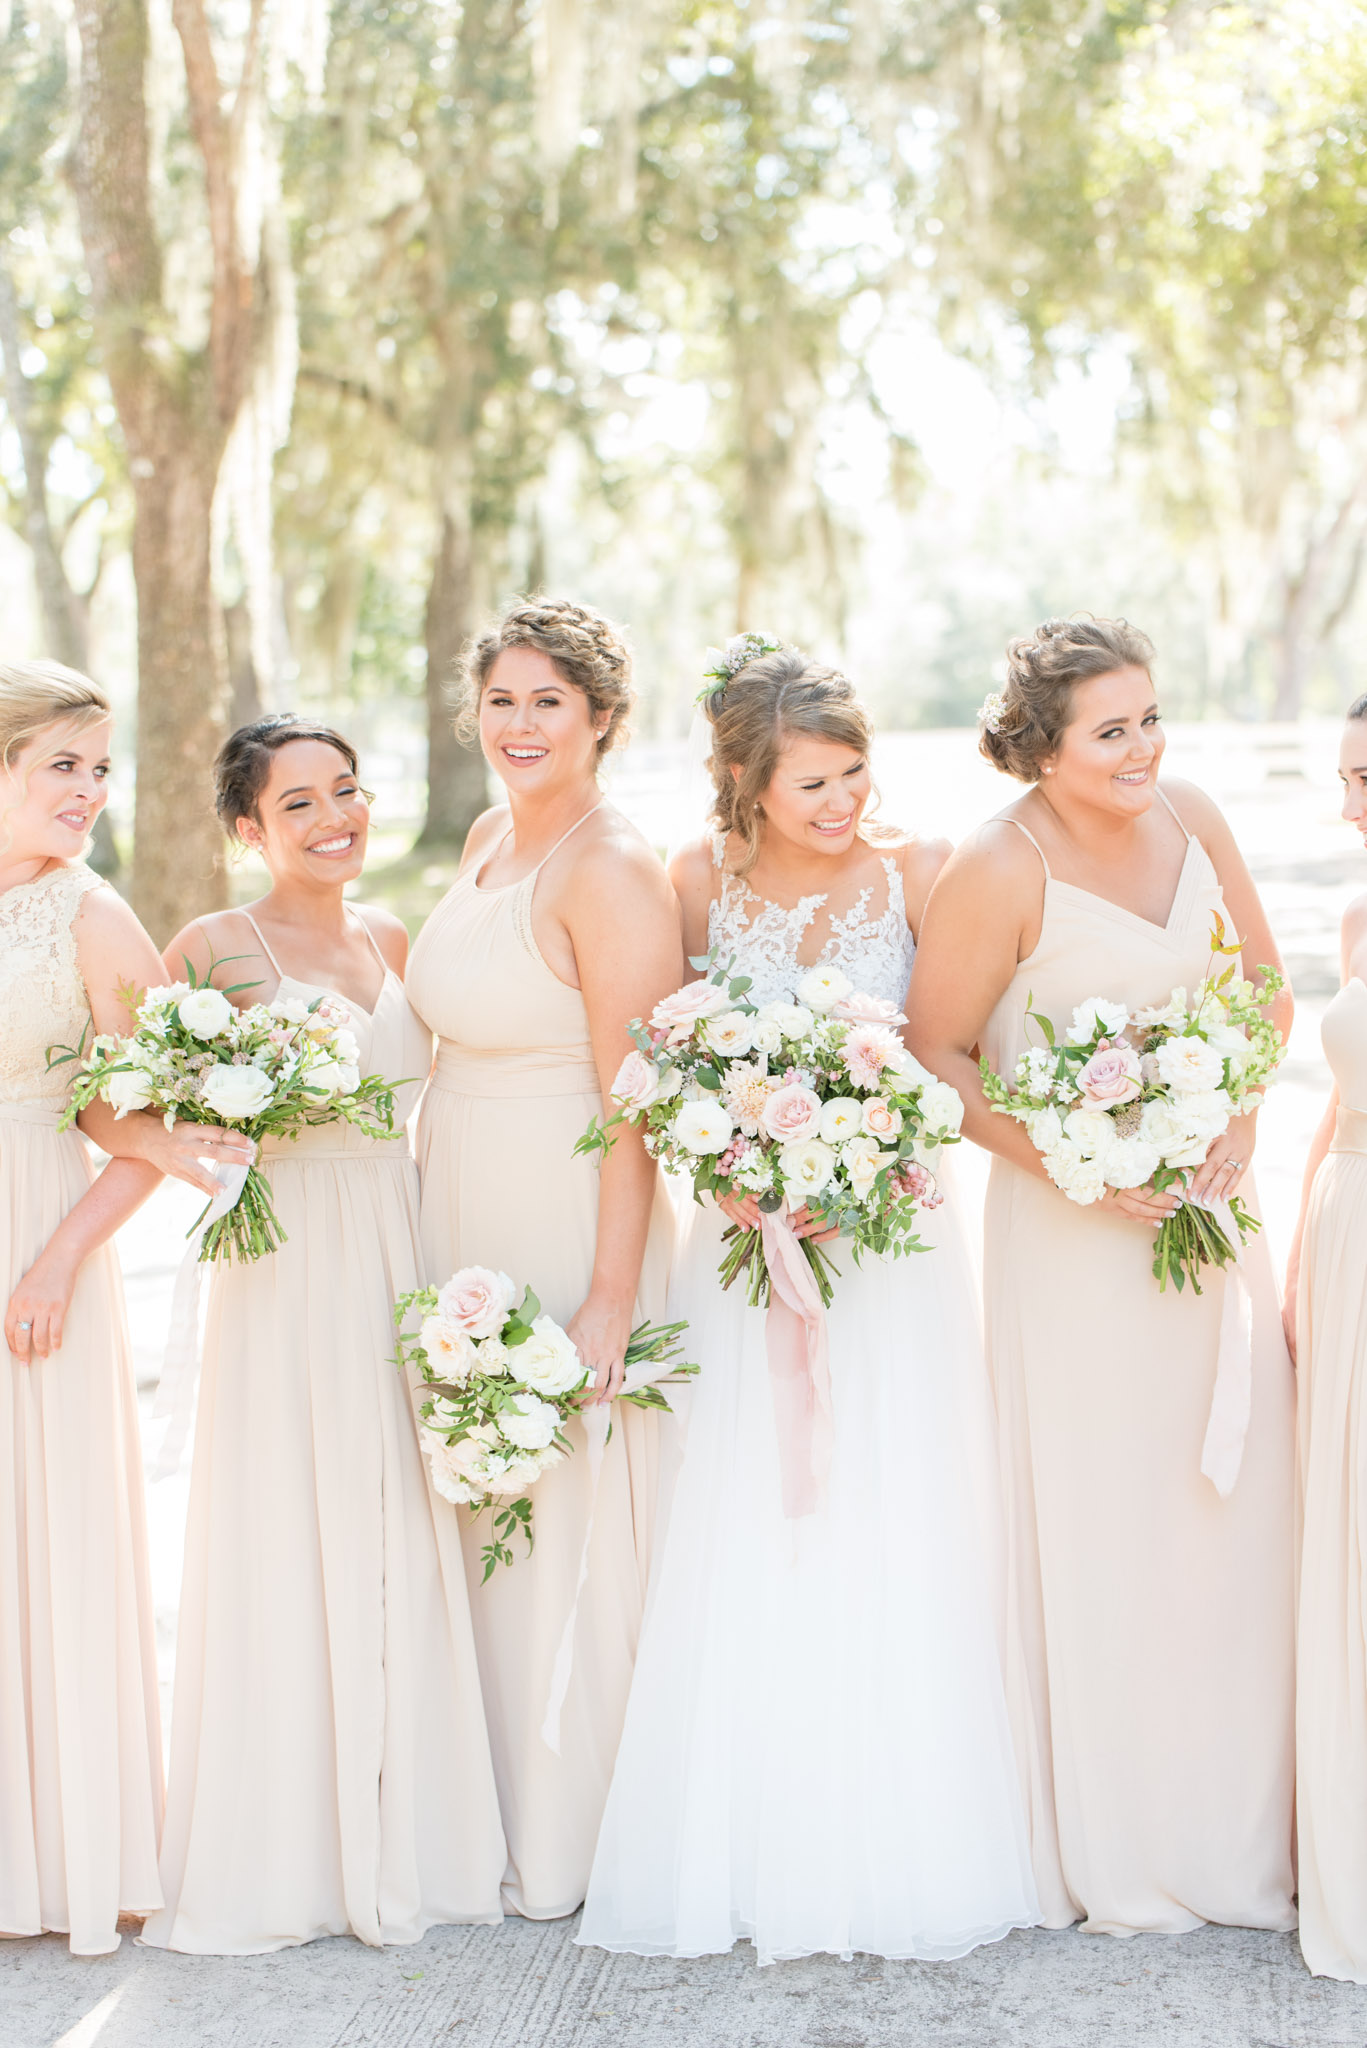 Bride and bridesmaids giggle together.